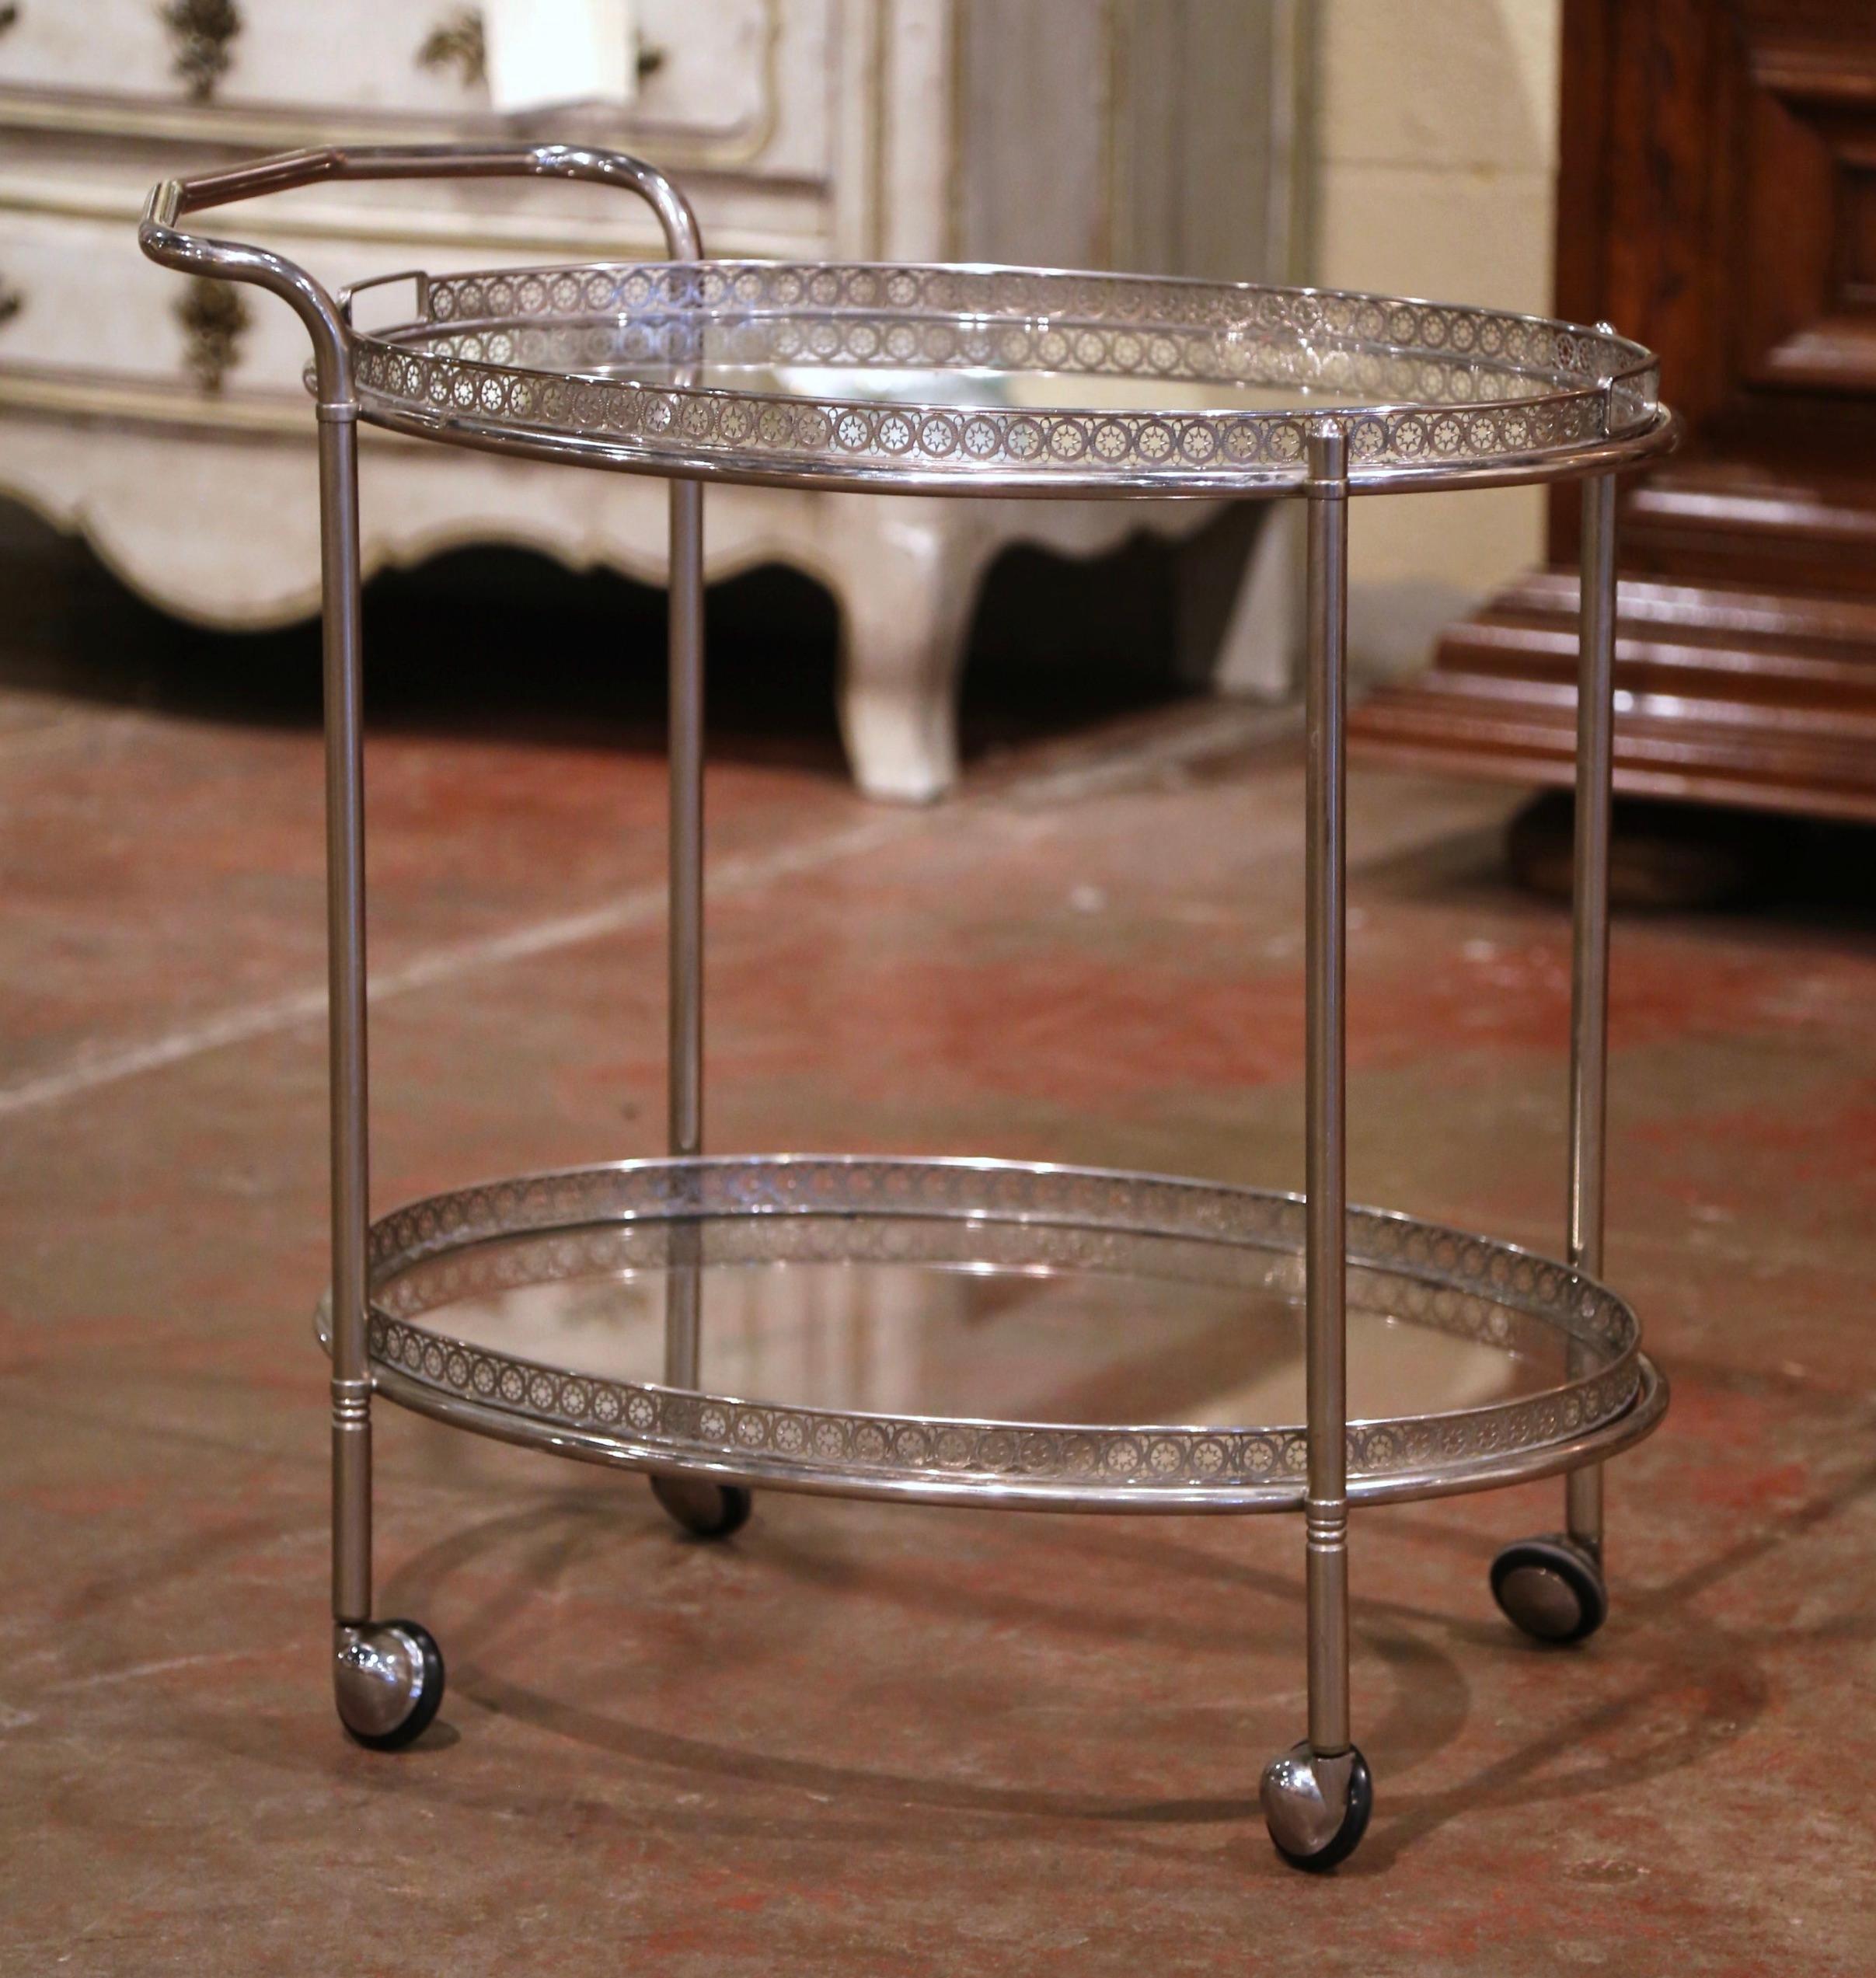 This elegant, vintage rolling bar cart was created in France, circa 1950. The dessert table stands on small casters wheels over straight legs, and features two oval plateaus topped with glass surfaces. The top deck has a shaped utilitarian handle